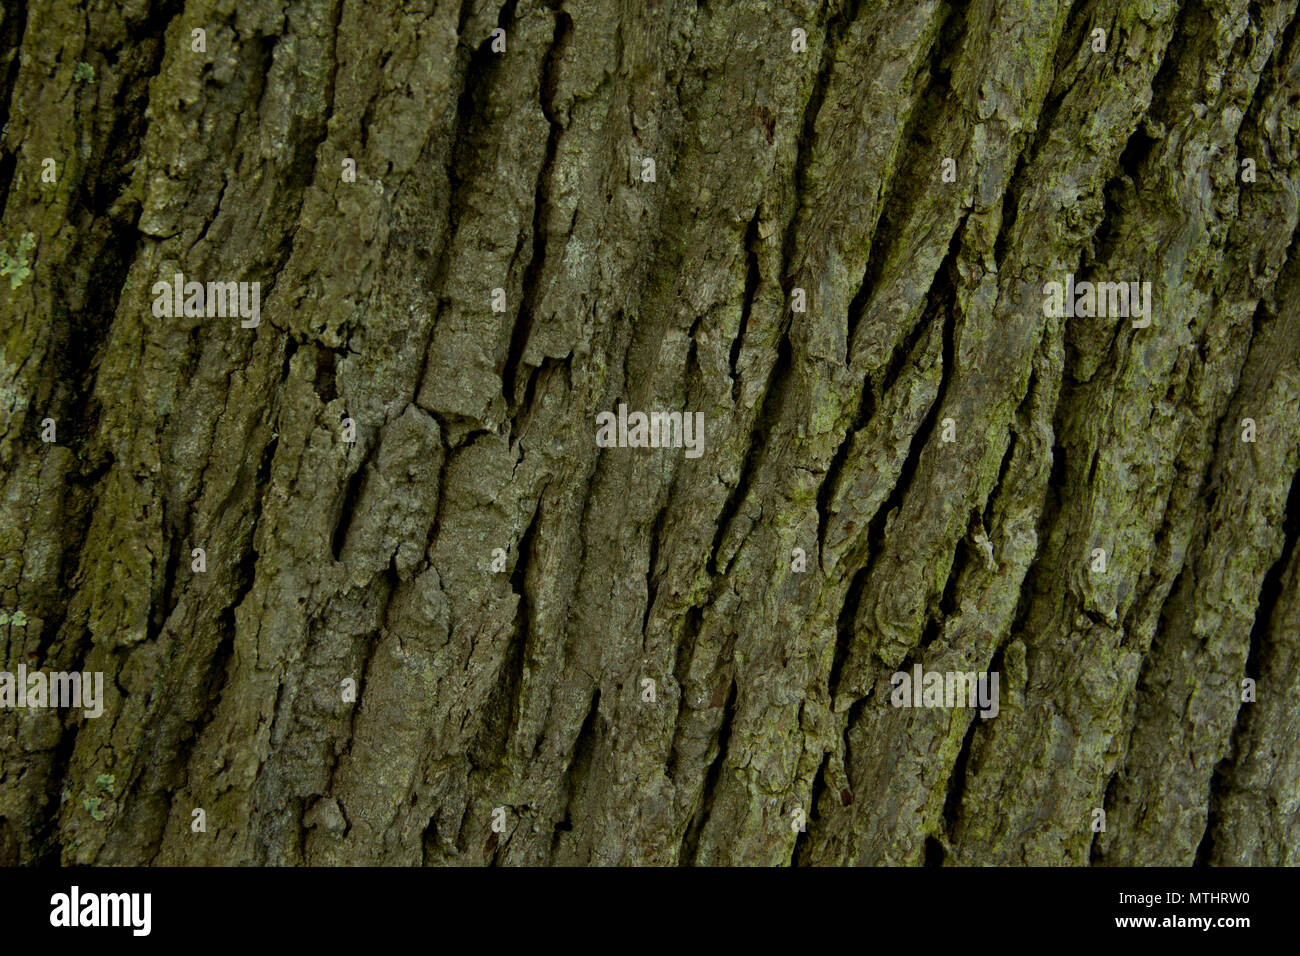 The texture of the bark in some trees, captured in a variety of locations including Upton Country Park, Durdle Door and Lulworth. Stock Photo